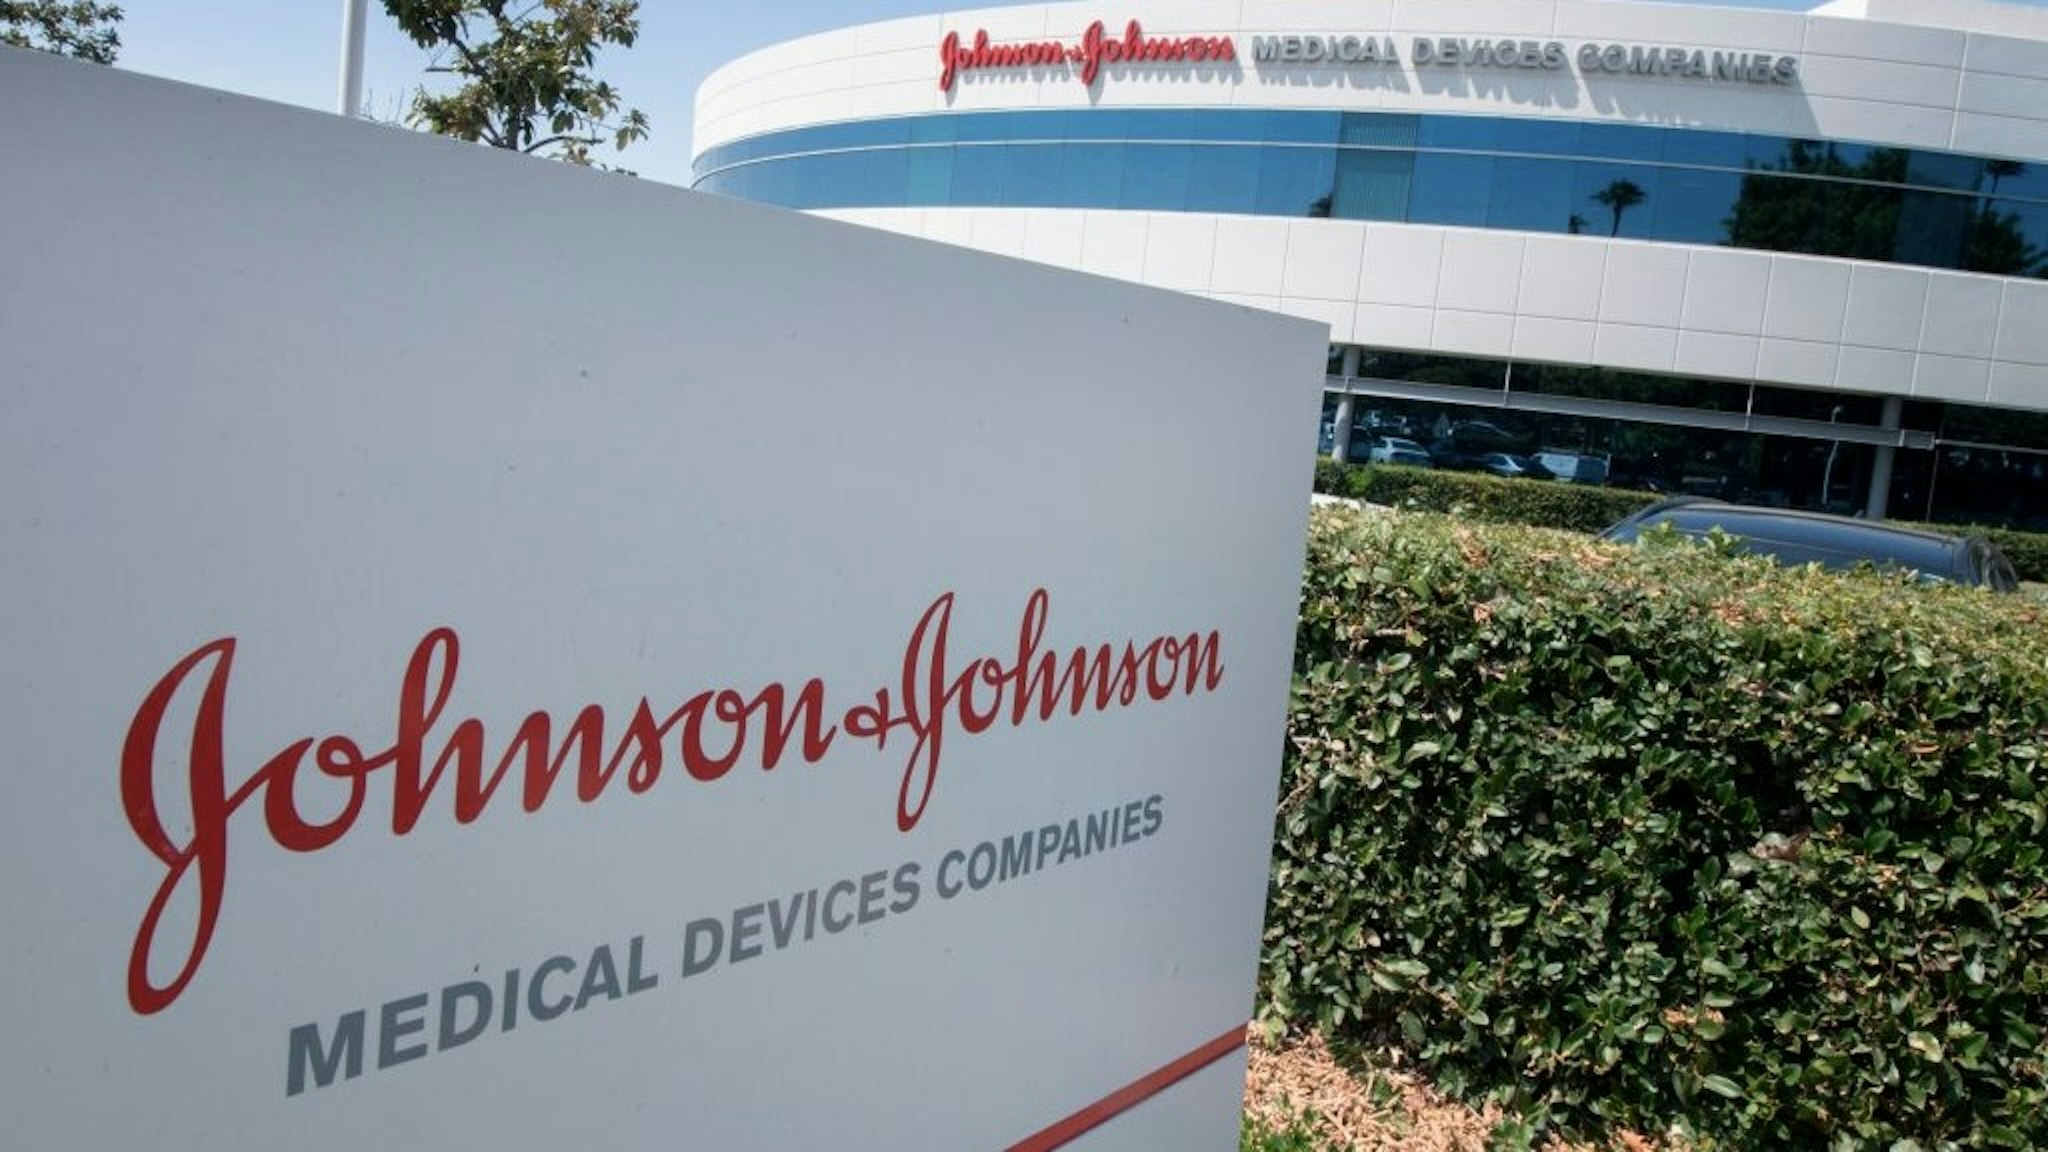 US-HEALTH-DRUGS-ADDICTION-COURT An entry sign to the Johnson & Johnson campus shows their logo in Irvine, California on August 28, 2019. - The US pharmaceutical industry faces tens of billions of dollars in potential damage payments for fueling the opioid addiction crisis after Oklahoma won a $572 million judgment against drugmaker Johnson & Johnson. (Photo by Mark RALSTON / AFP) (Photo by MARK RALSTON/AFP via Getty Images) MARK RALSTON / Contributor